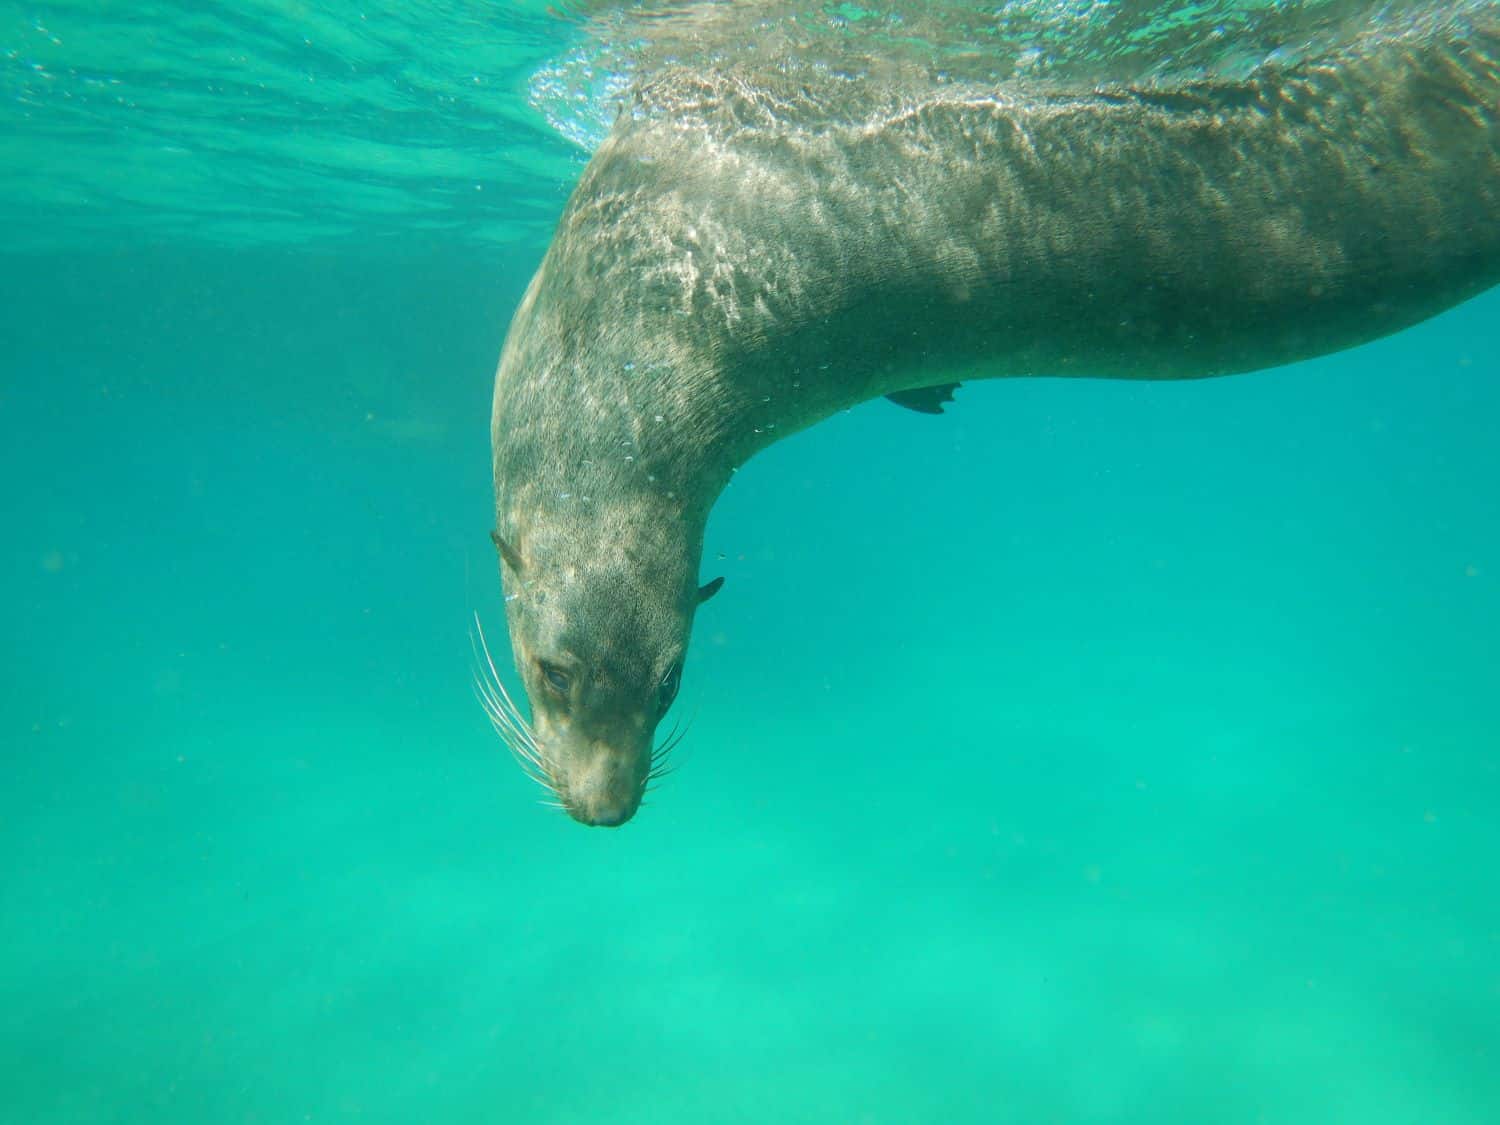 Swimming with seals in Queenscliff on a Melbourne day trip